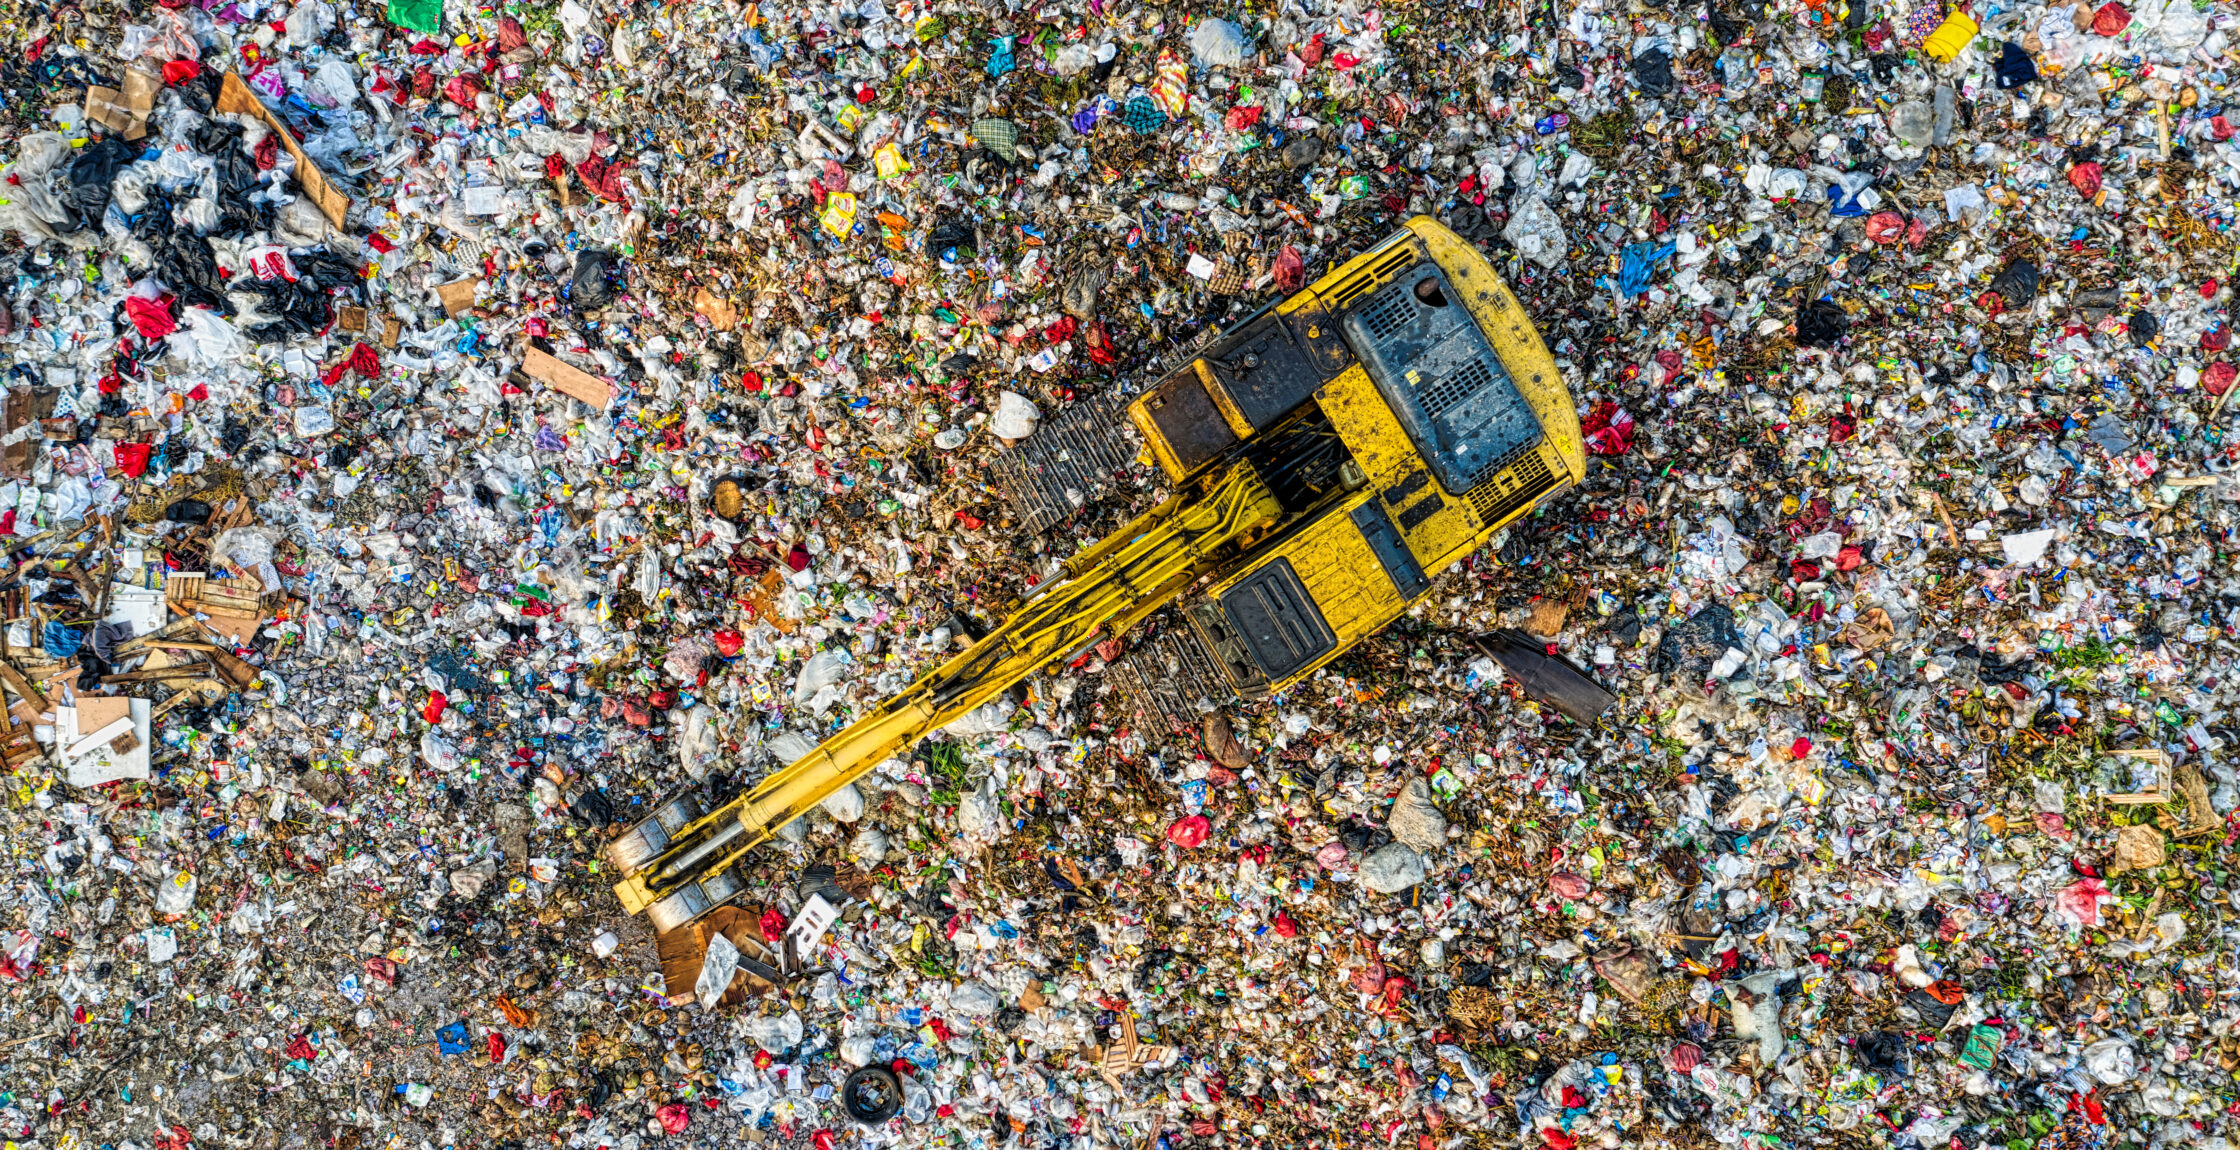 The impact of COVID-19 on mattress recycling and UK landfill